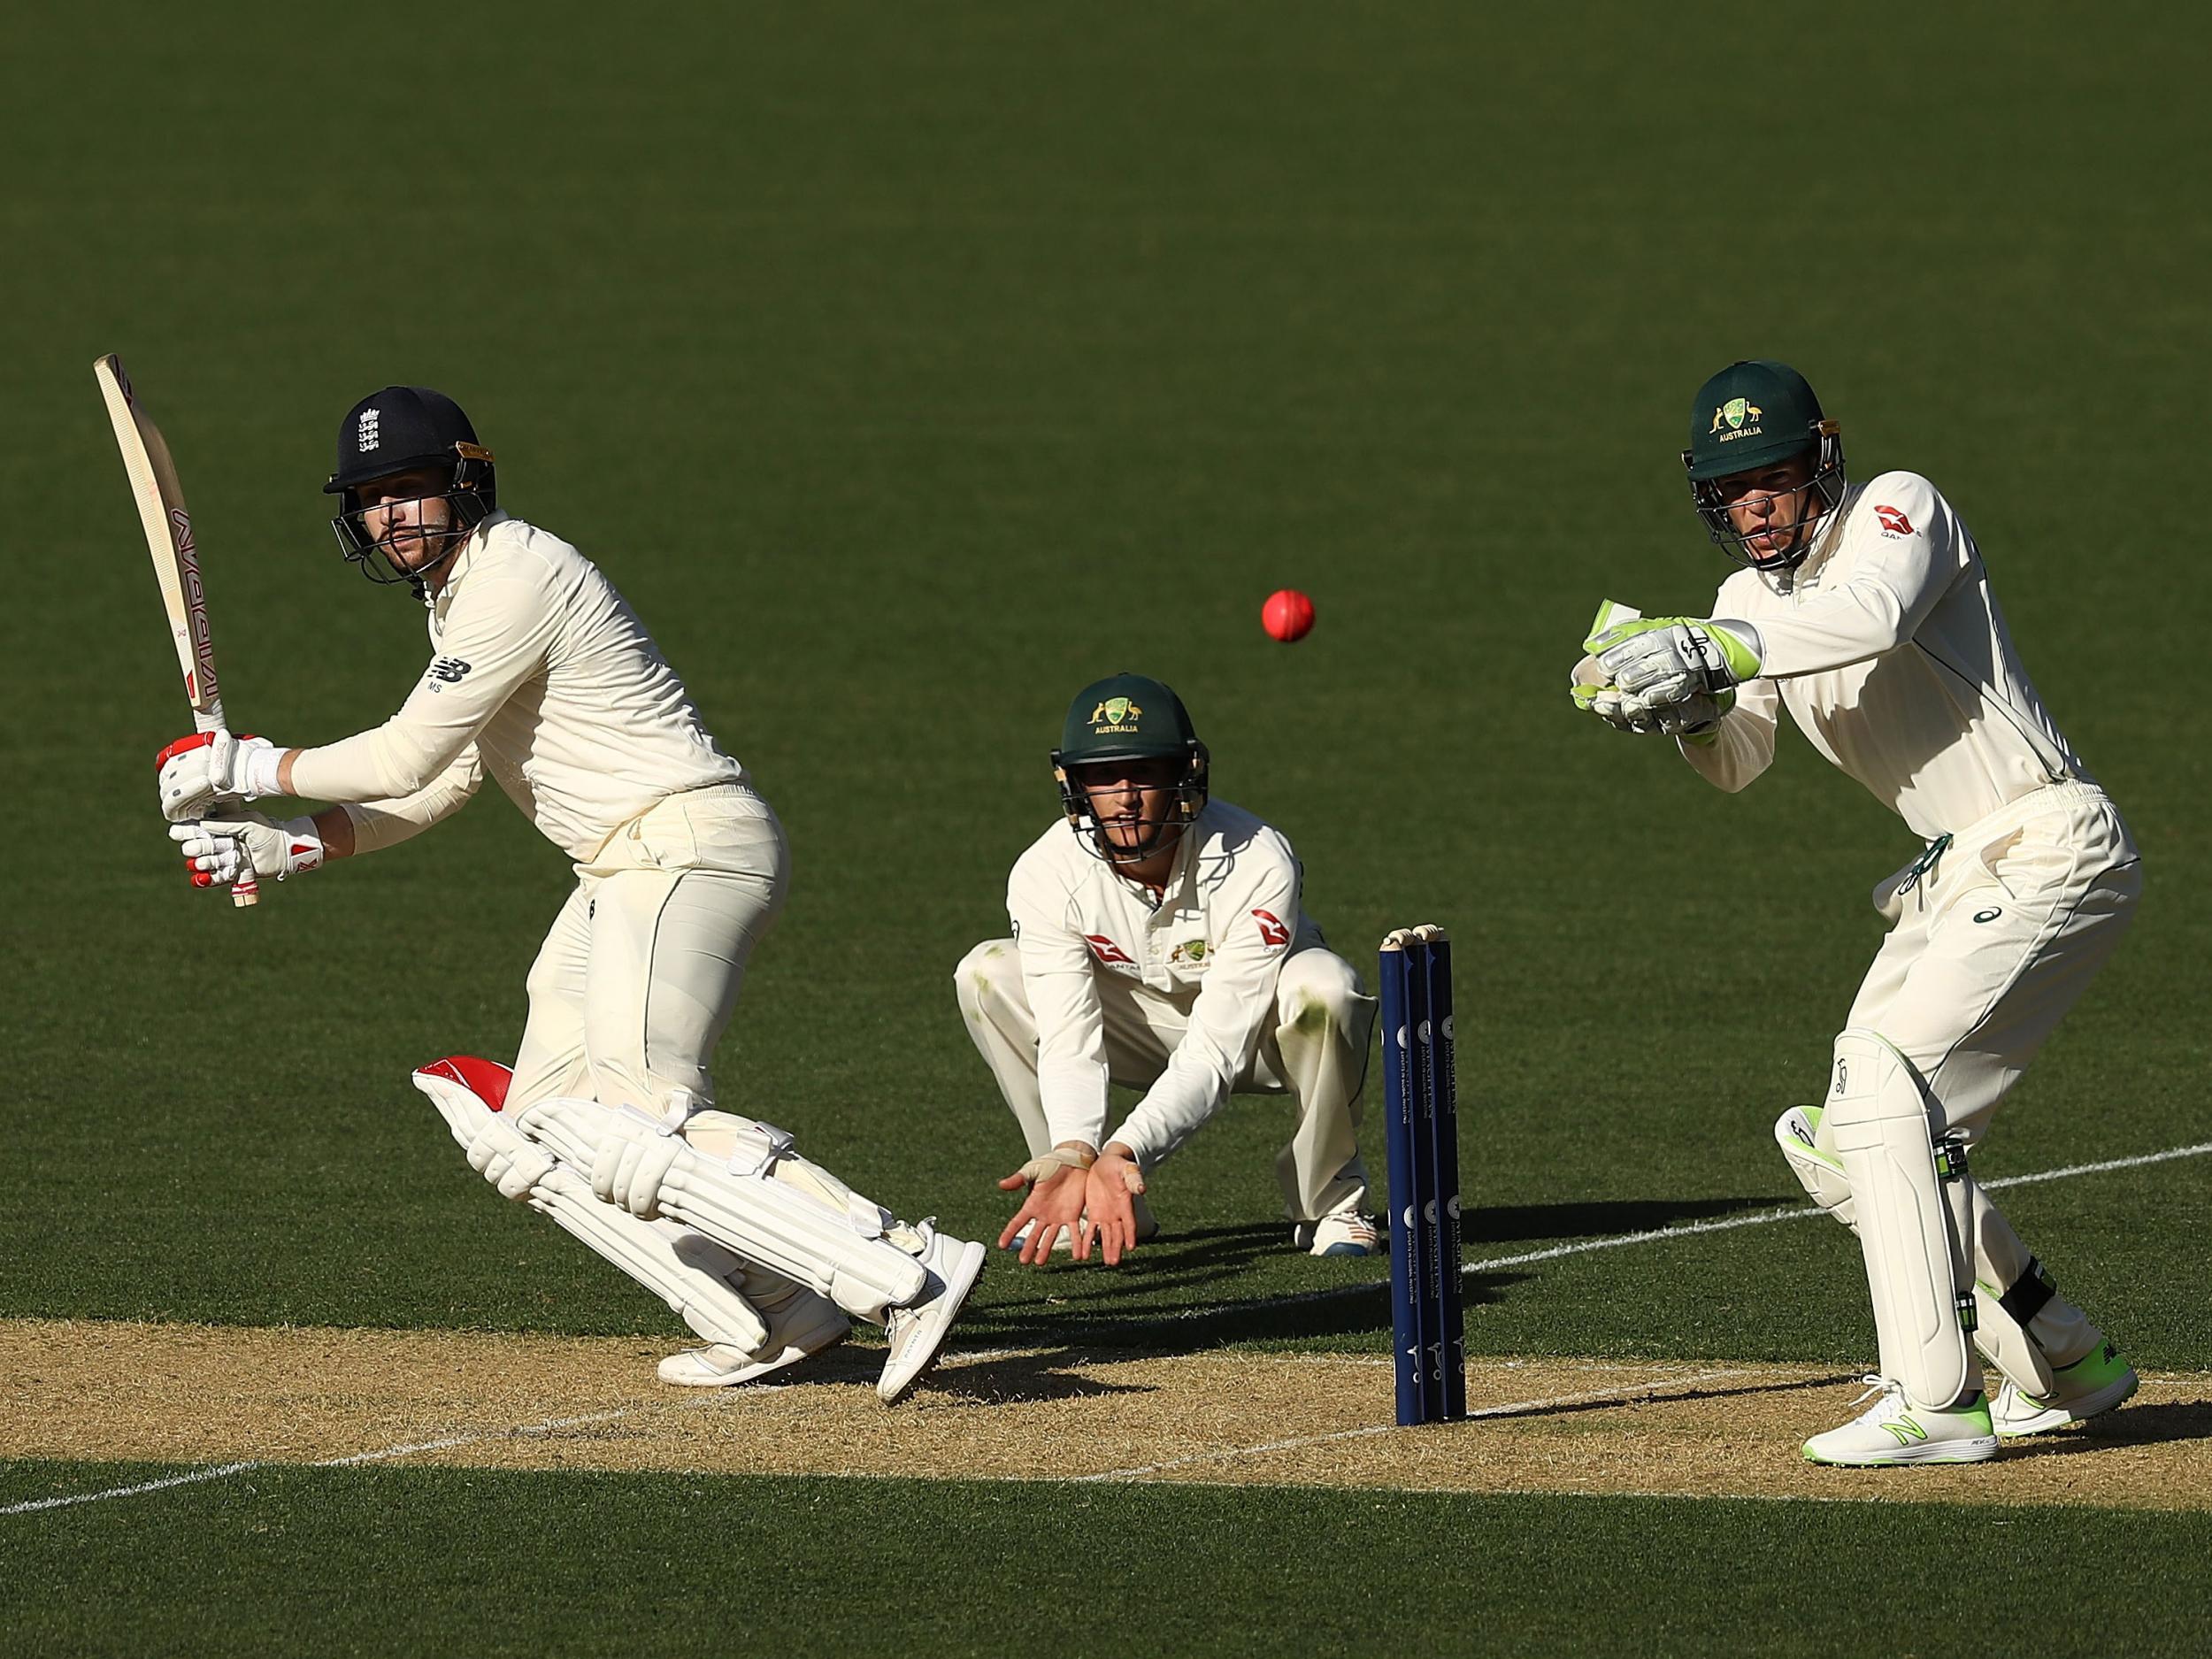 &#13;
Stoneman brought up fifty to boost confidence ahead of the first Test &#13;